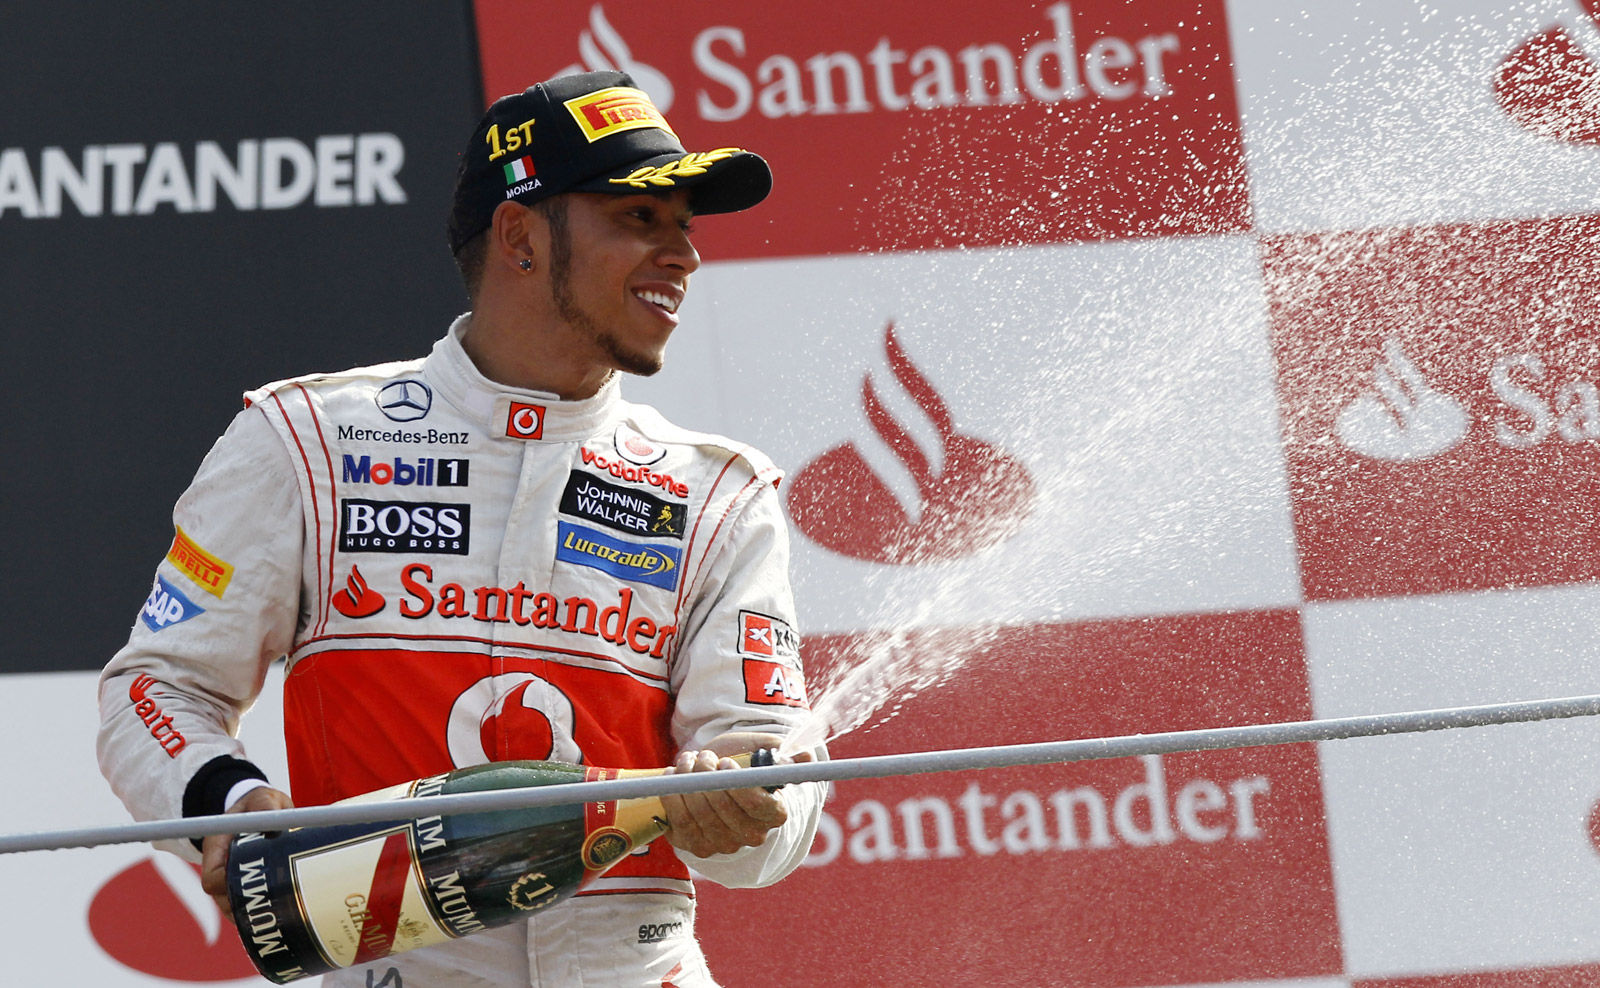 Hamilton shines at Monza with victory for McLaren - Bitesize